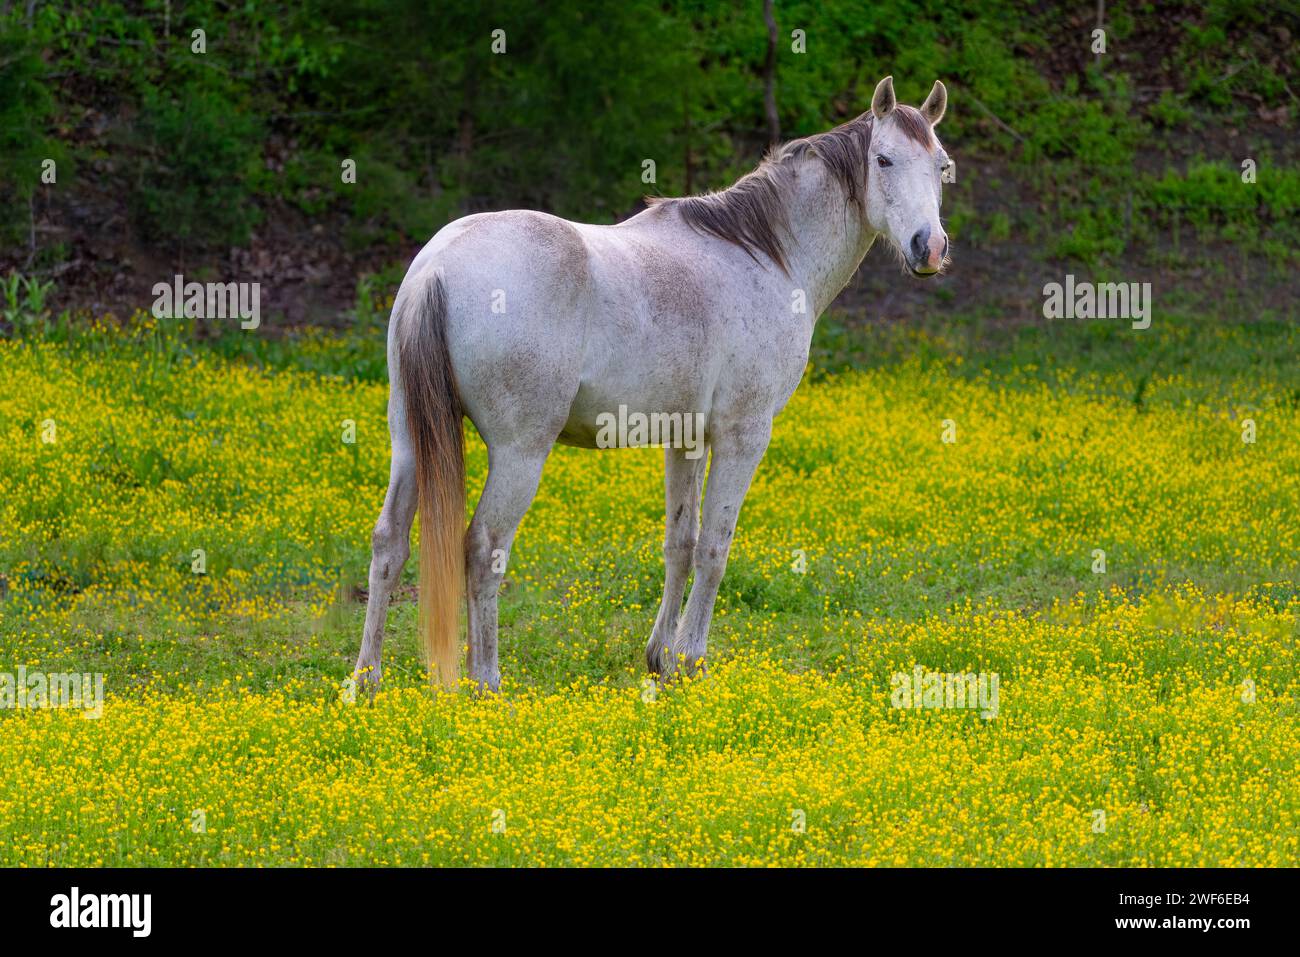 A solitary grey horse is captured standing serenely amongst vibrant yellow wildflowers, with a verdant backdrop hinting at the fresh renewal of spring Stock Photo